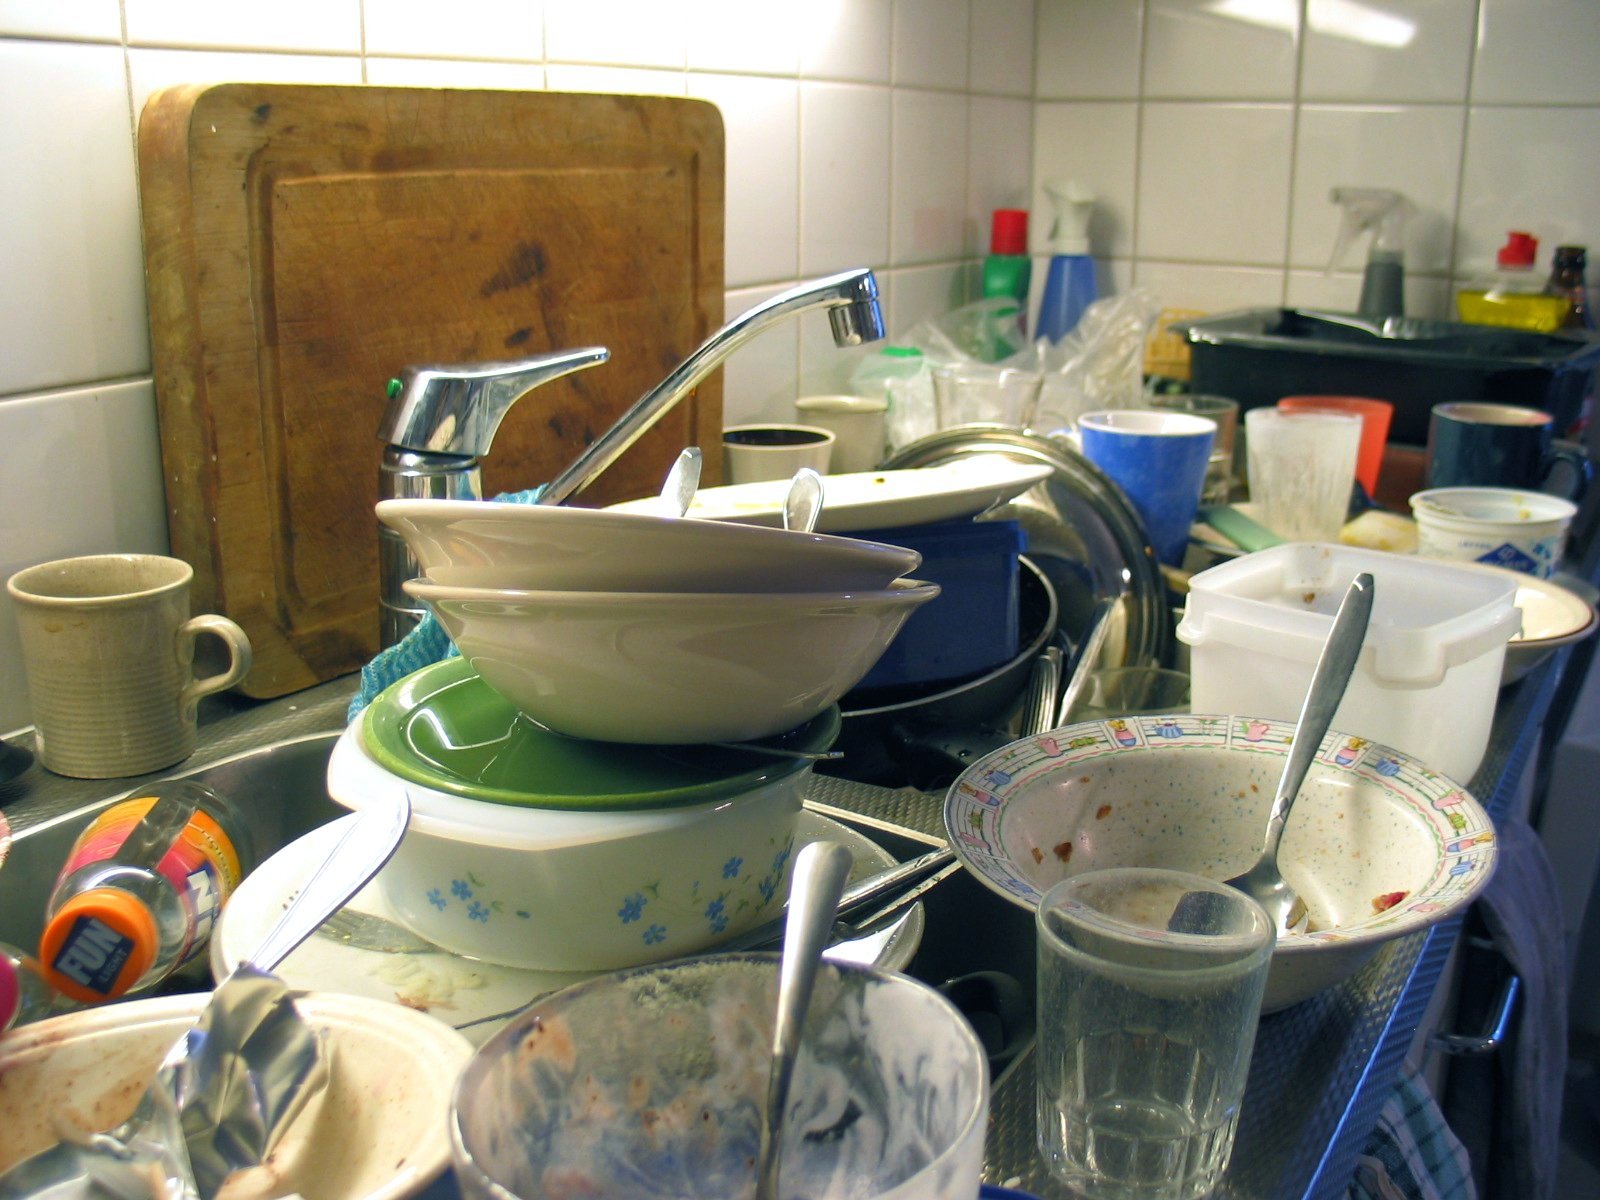 Piles of dirty dishes waiting to be washed up